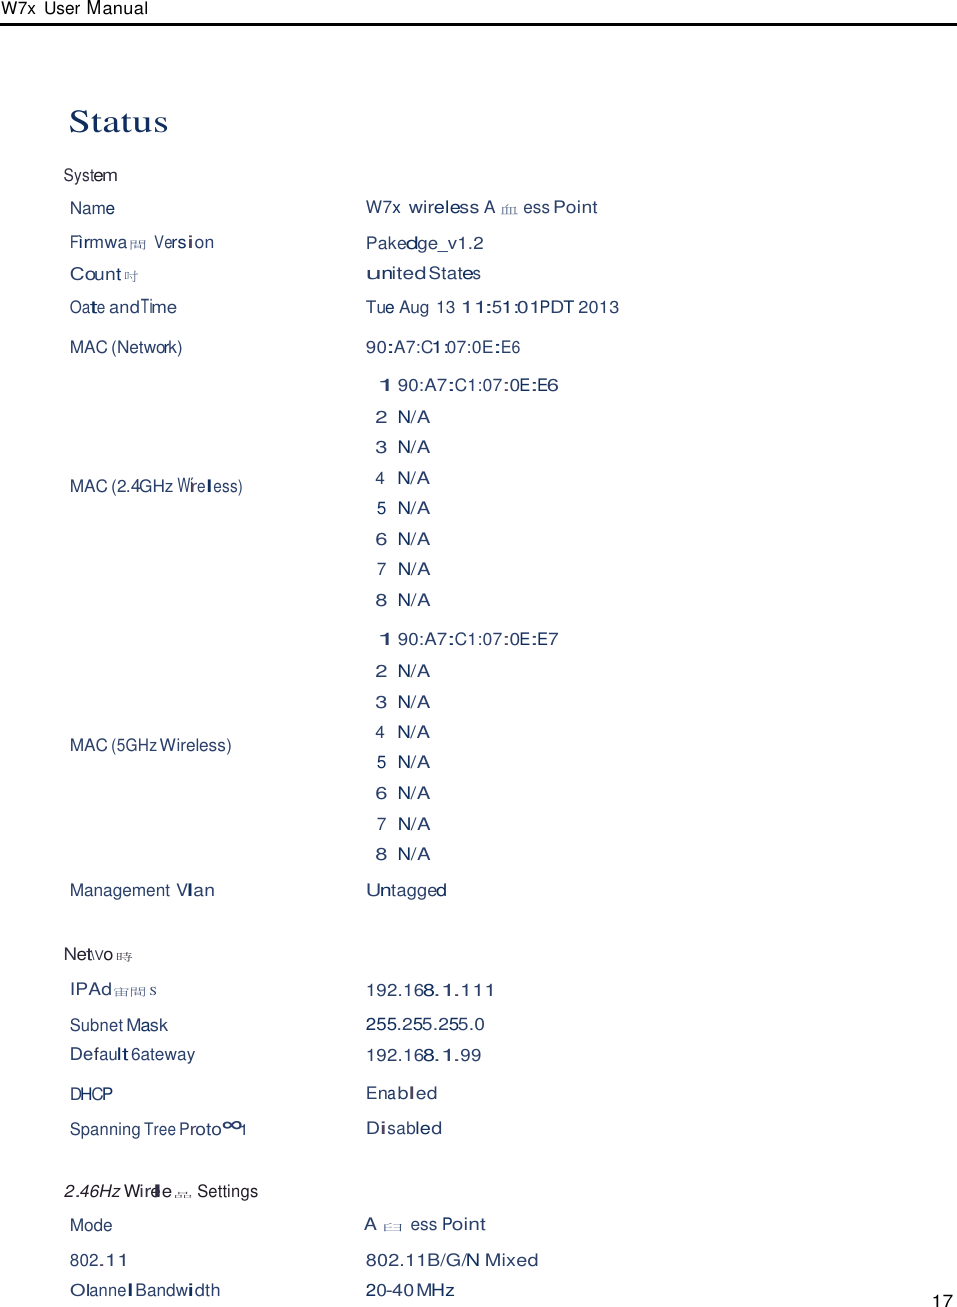 W7x  User Manual       Status  System  Name   W7x wireless A血ess Point  Fìrmwa間 Version Pakedge_v1.2  Count吋  united States Oate andTime  Tue Aug 13 11:51:01PDT 2013  MAC (Network)  90:A7:C1:07:0E:E6       MAC (2.4GHz Wíreless)             MAC (5GHz Wireless) 1 90:A7:C1:07:0E:E6  2 N/A  3 N/A  4  N/A  5  N/A  6 N/A  7  N/A  8 N/A  1 90:A7:C1:07:0E:E7  2 N/A  3 N/A  4  N/A  5  N/A  6 N/A  7  N/A  8 N/A  Management Vlan Untagged   Net\Vo時  IPAd宙間S 192.168.1.111  Subnet Mask  255.255.255.0 Default 6ateway  192.168.1.99  DHCP  Ena bled Spanning Tree Proto∞1 Disabled   2.46Hz Wirele品Settings  Mode  A臼 ess Point  802.11 802.11B/G/N Mixed Olannel Bandwidth 20-40 MHz  17 